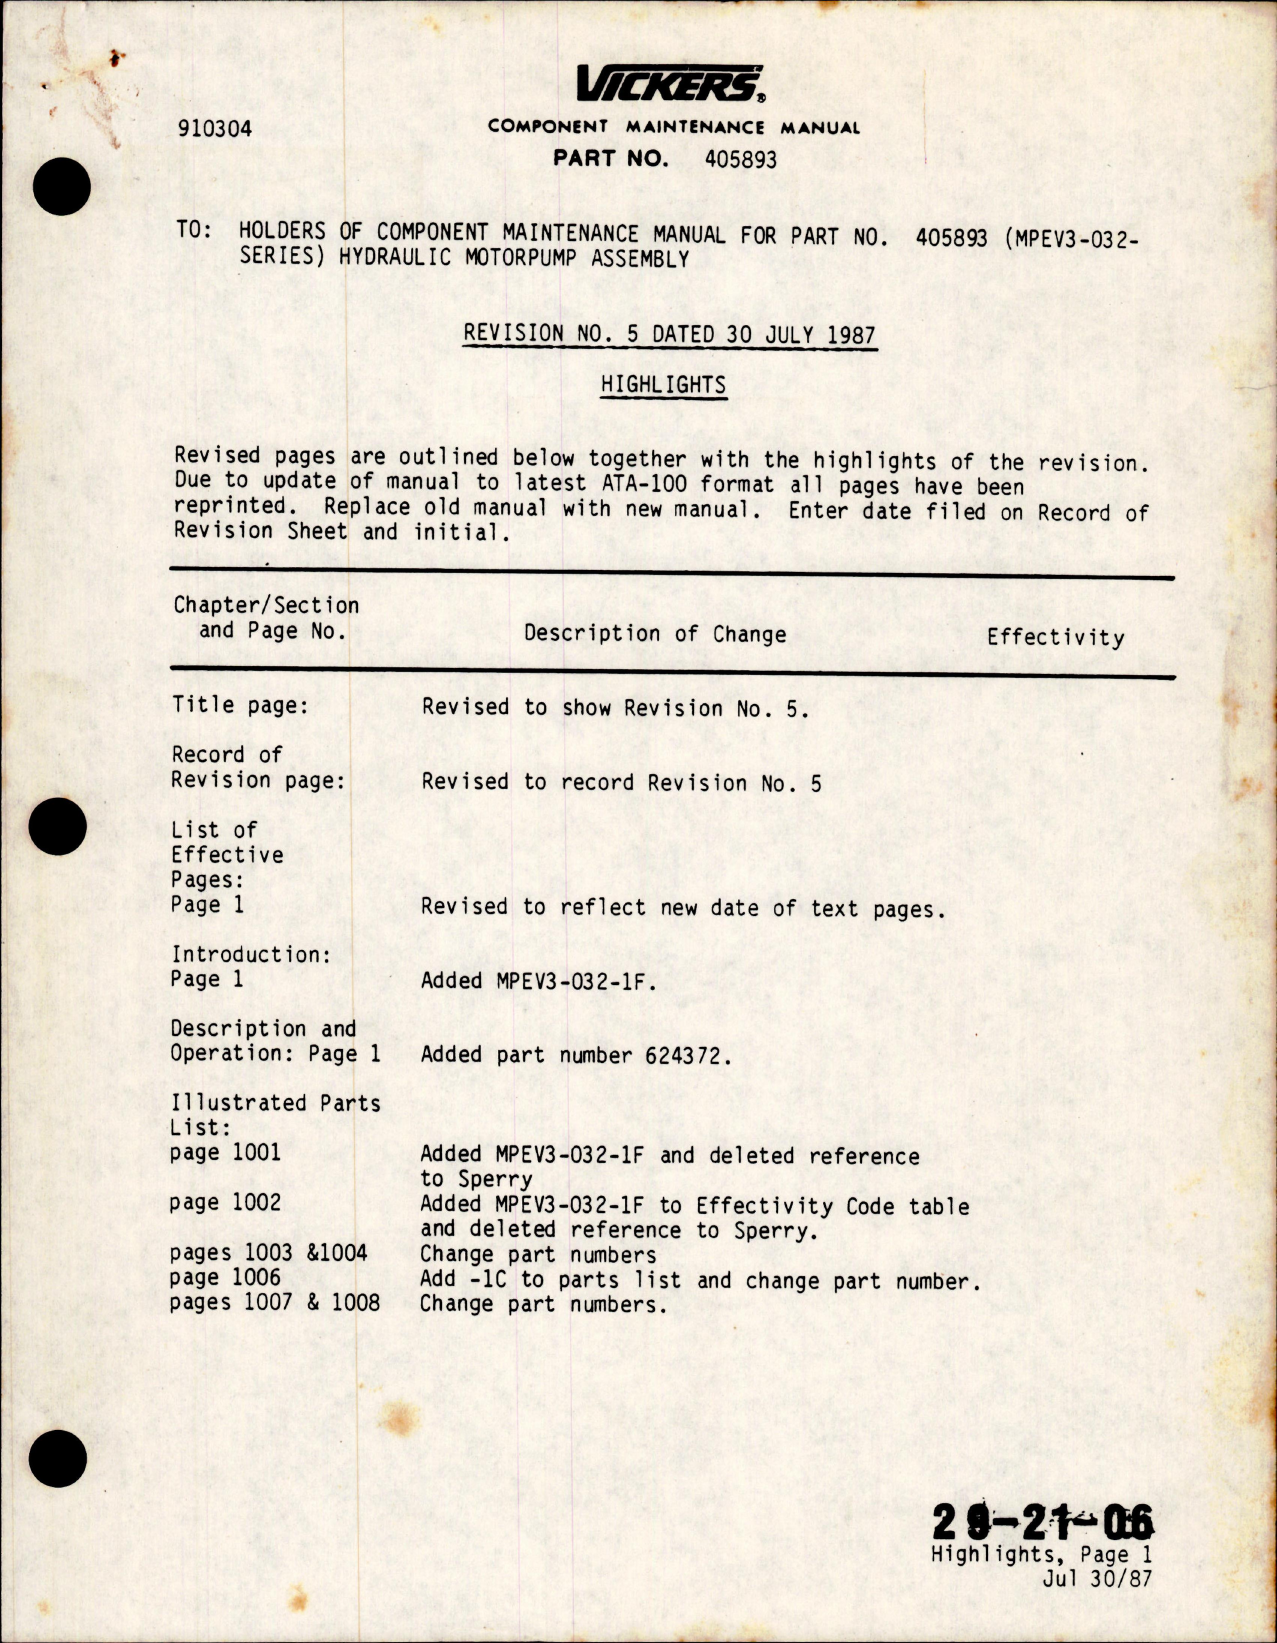 Sample page 1 from AirCorps Library document: Maintenance with Illustrated Parys List for Hydraulic Motorpump Assembly - Part 405893 - Revision No. 5 